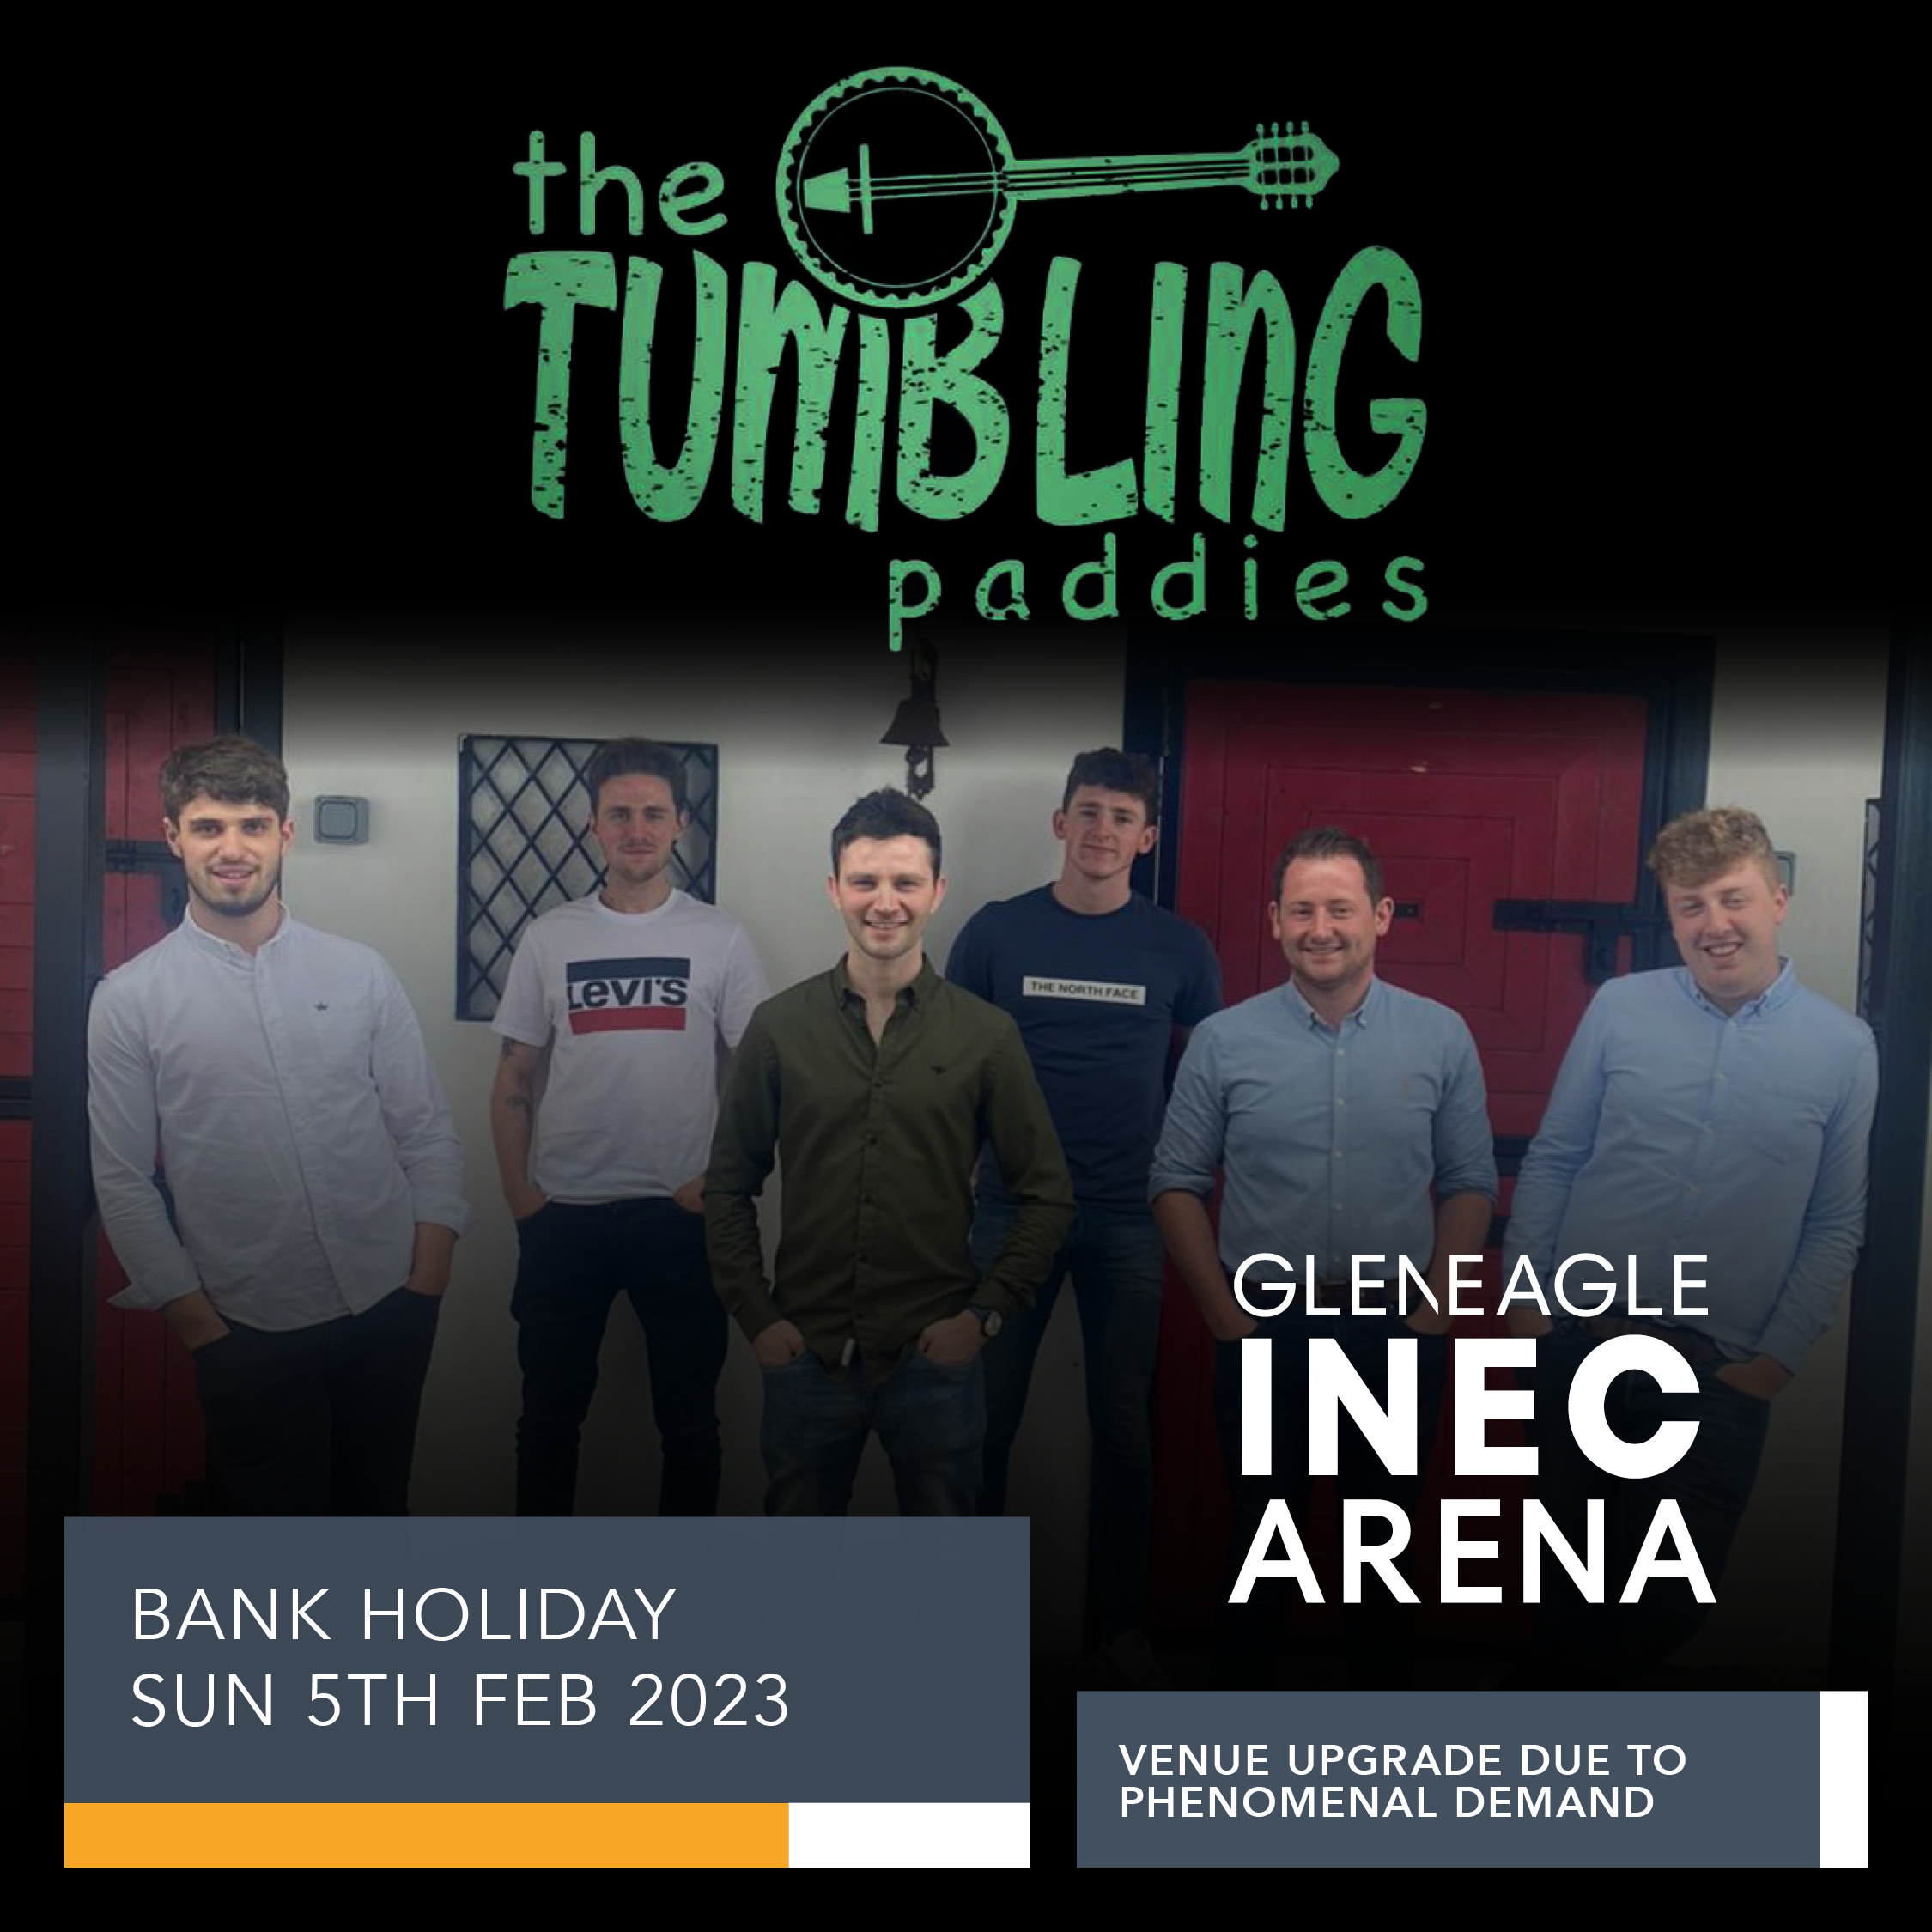 The Tumbling Paddies perform in the Gleneagle INEC Arena on February 5th 2023.